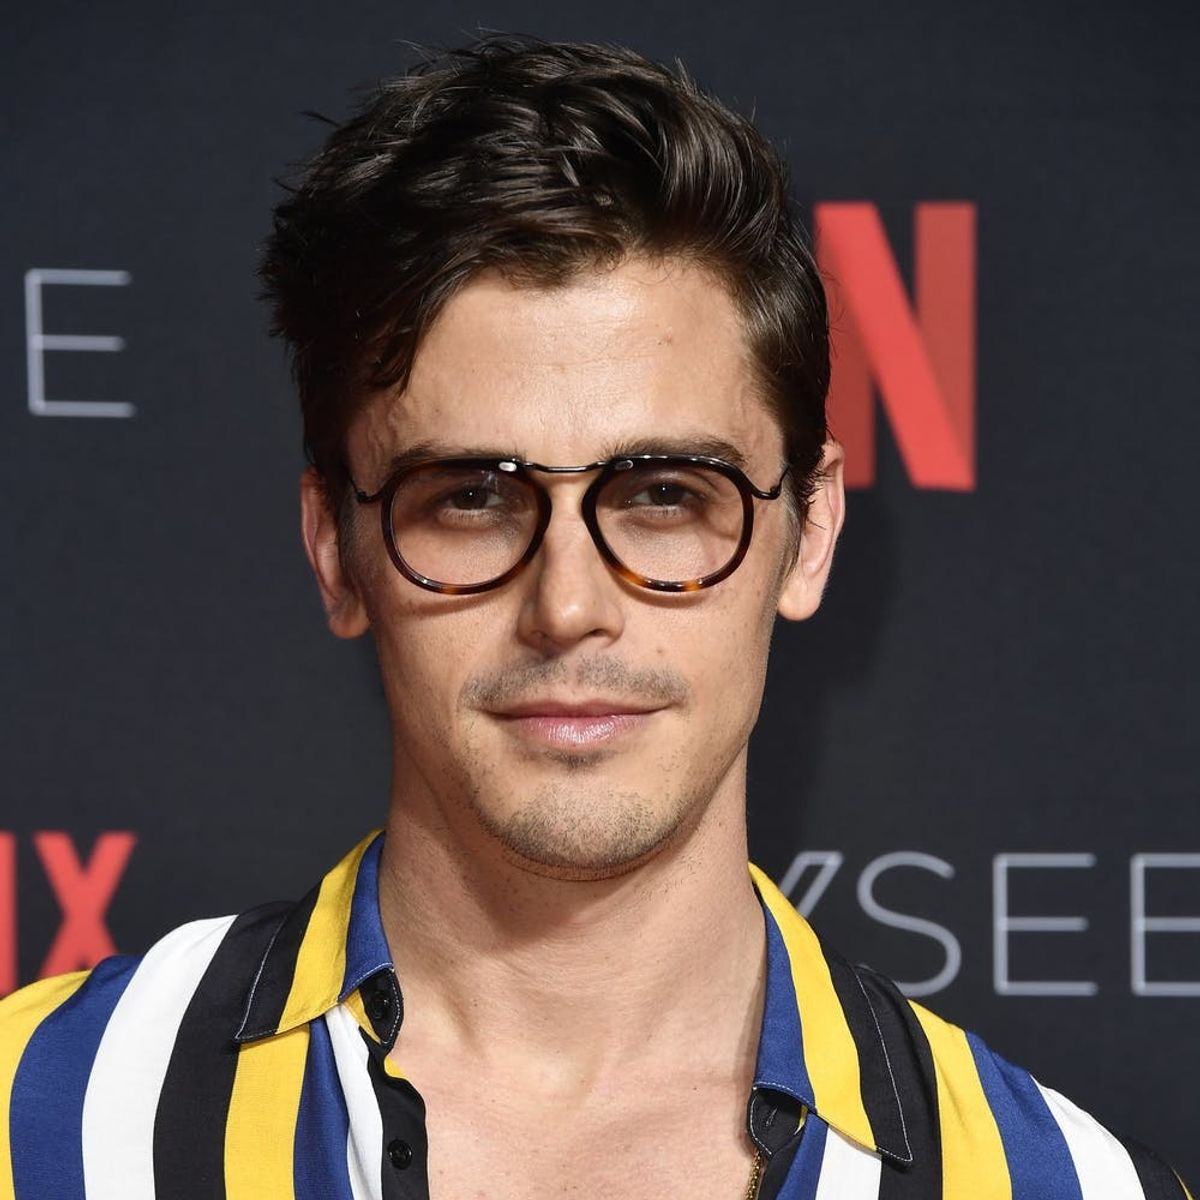 ‘Queer Eye’ Food Expert Antoni Porowski Says Why He’s Not Ready to Make Desserts Just Yet